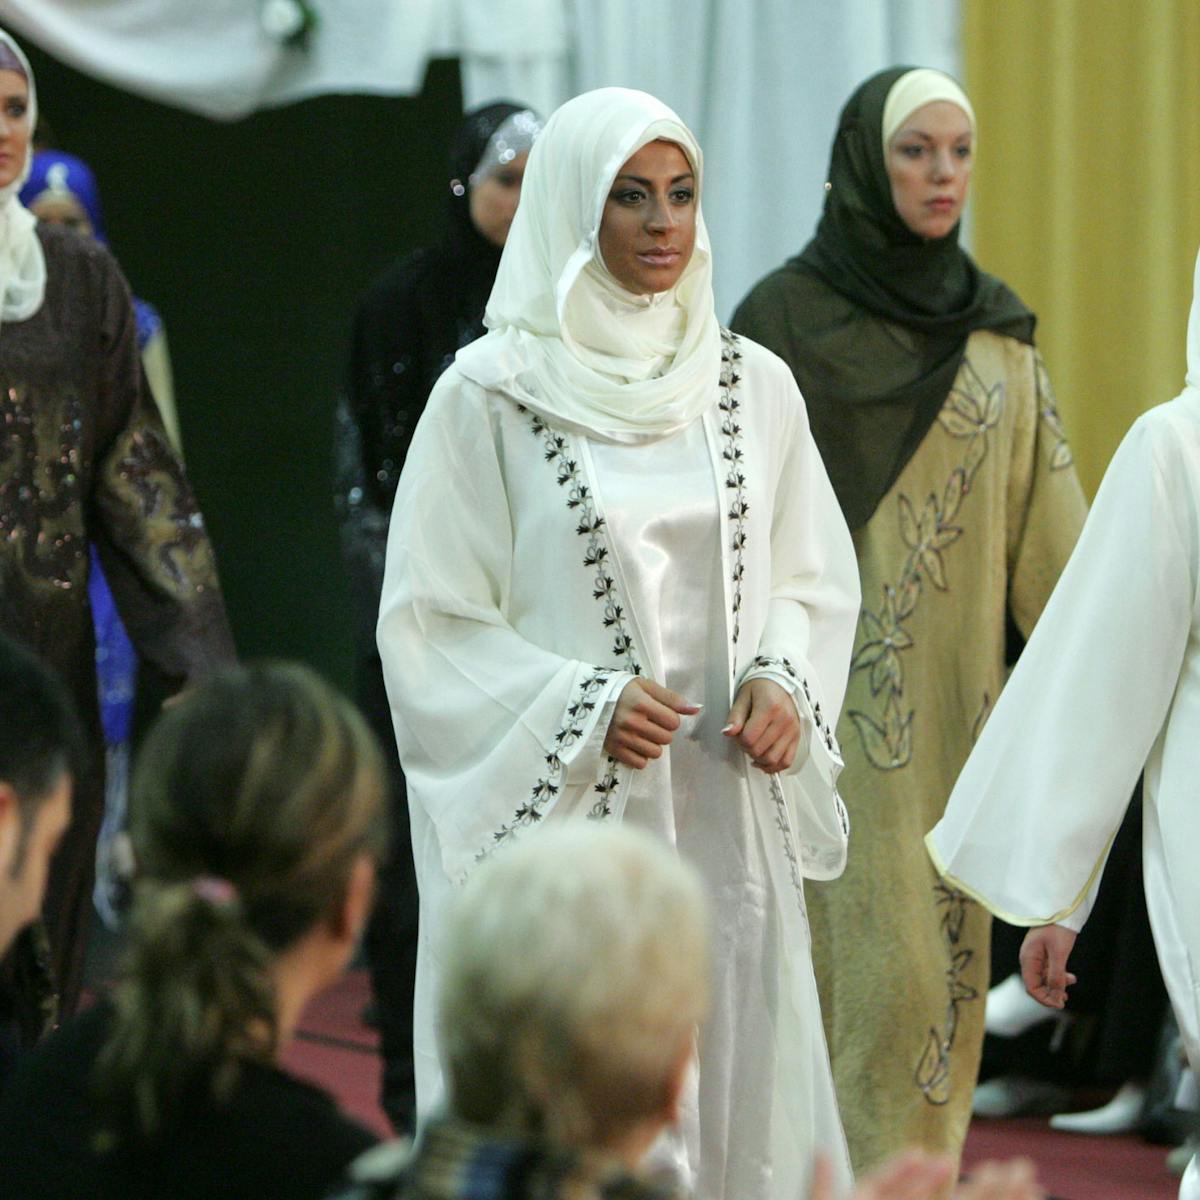 How the hijab has grown into a fashion industry